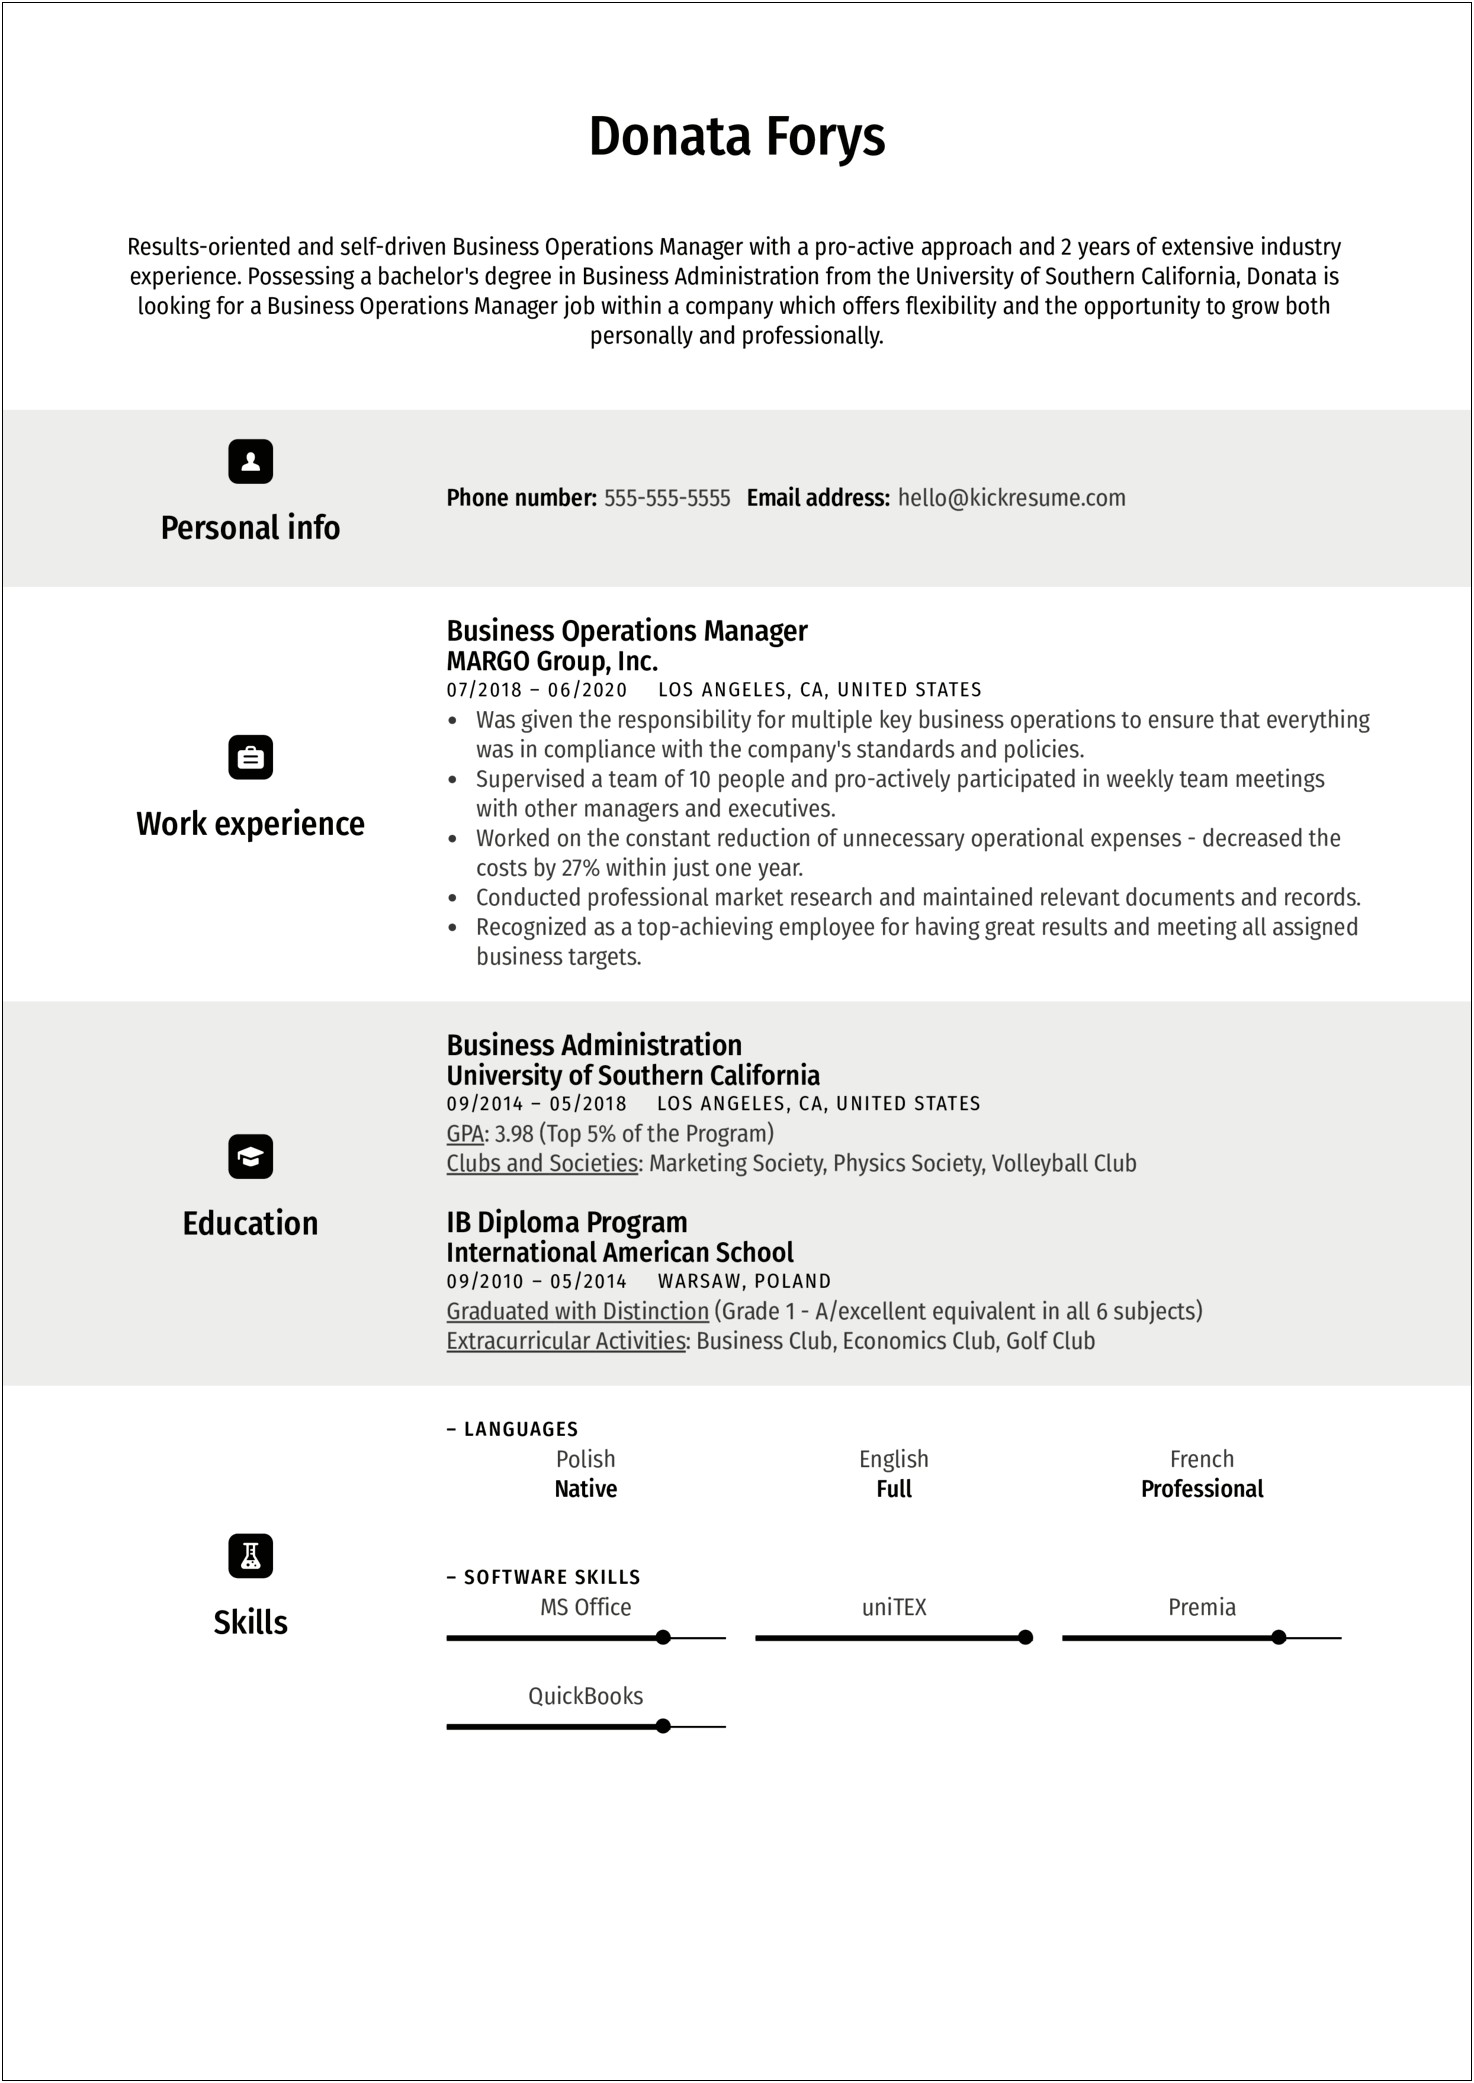 Resume Skills For Operations Manager